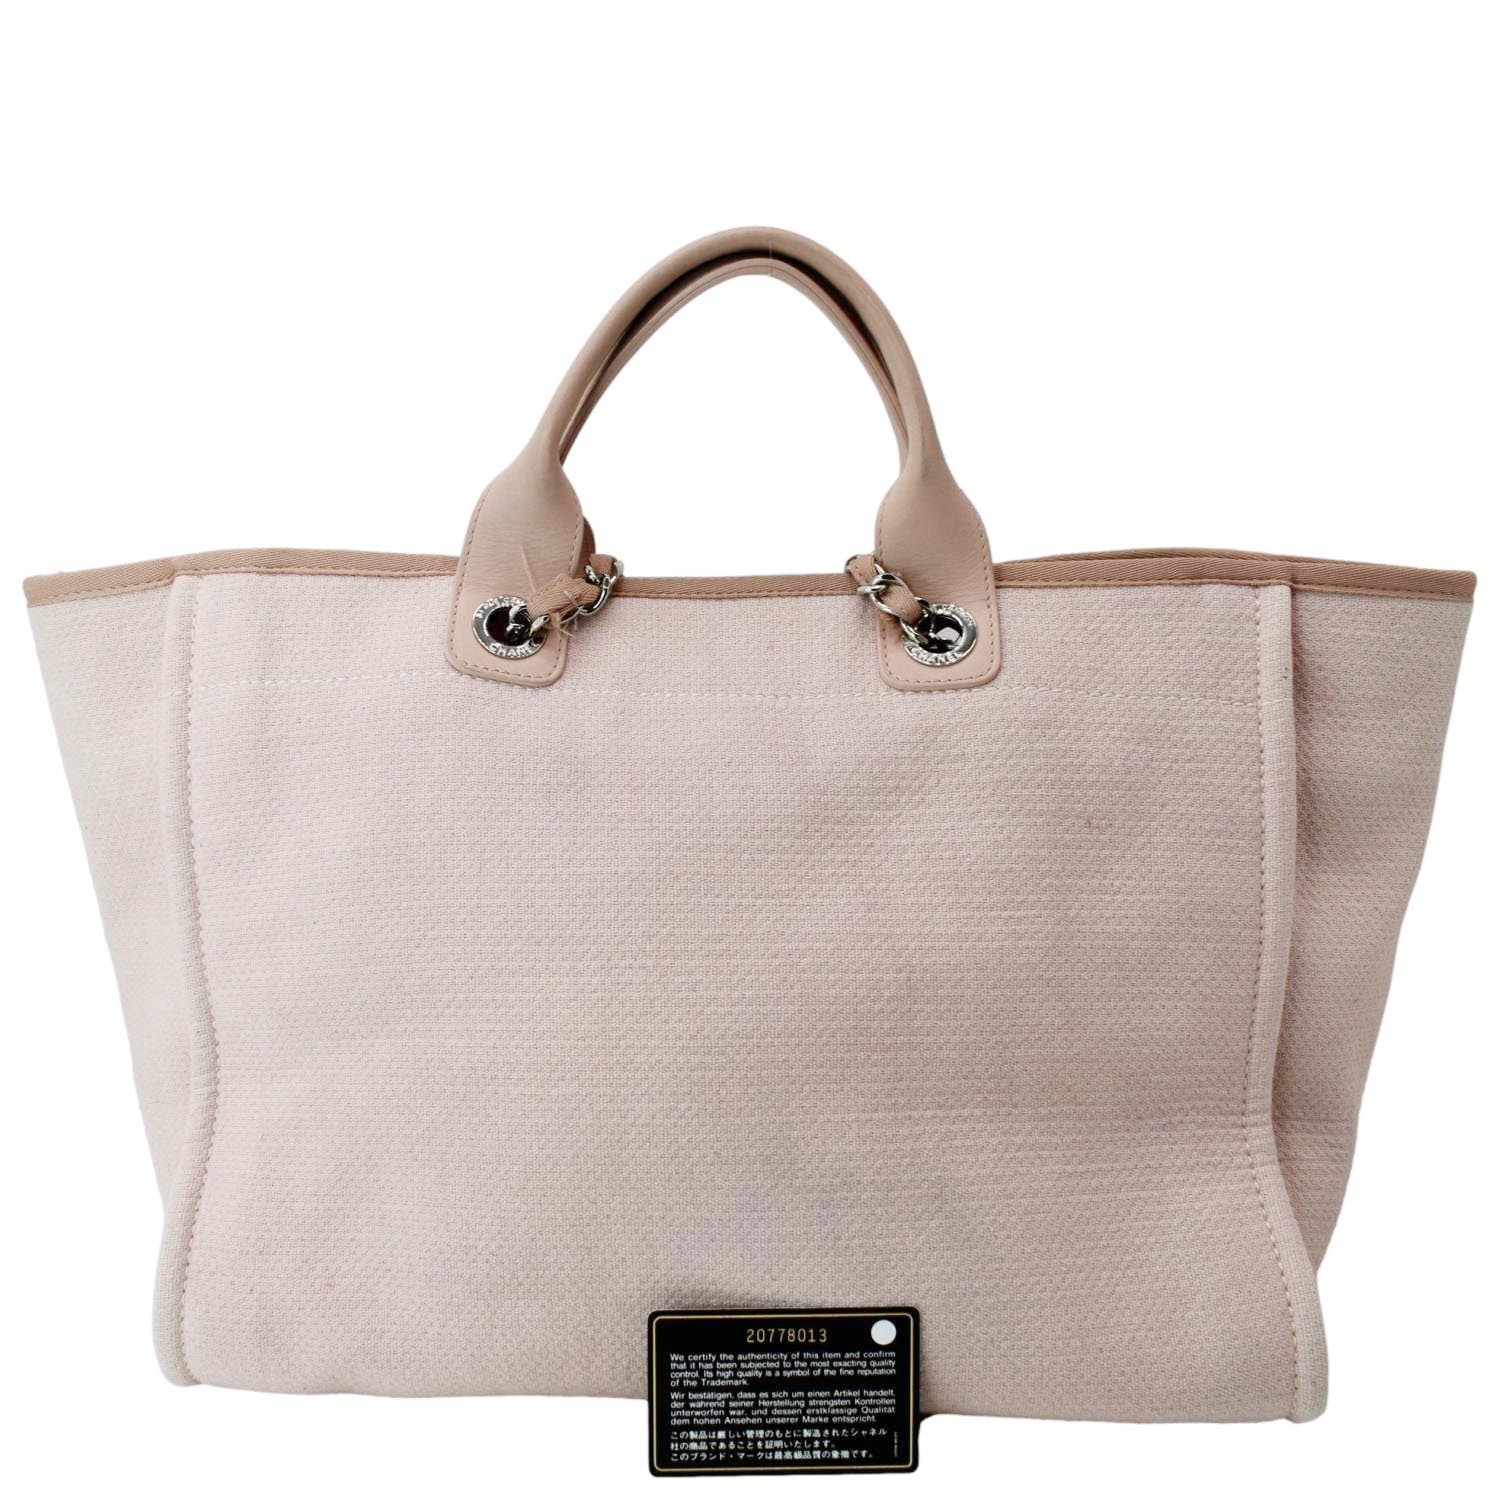 CHANEL Canvas Large Deauville Tote Pink 436019